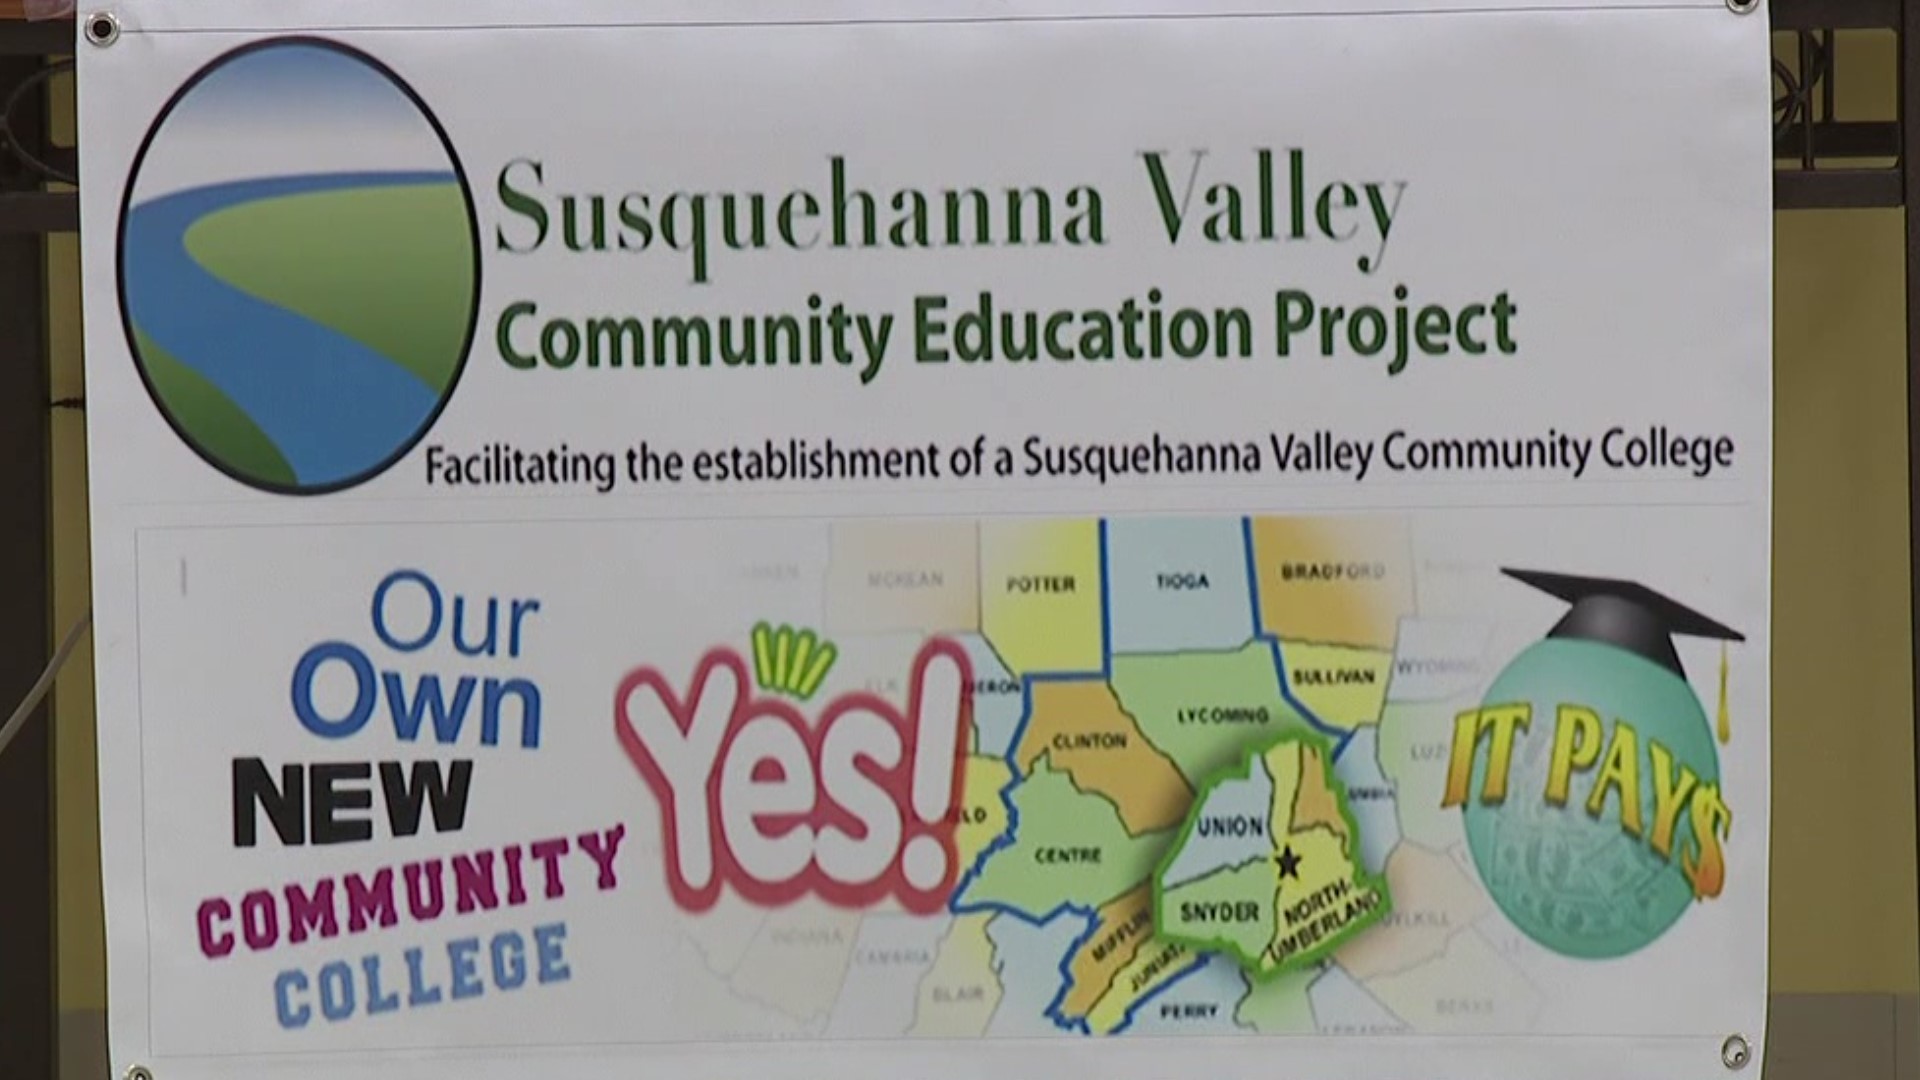 Susquehanna Valley Community Education Project has been doing studies for more than a decade in regards to putting a community college in central Pennsylvania.